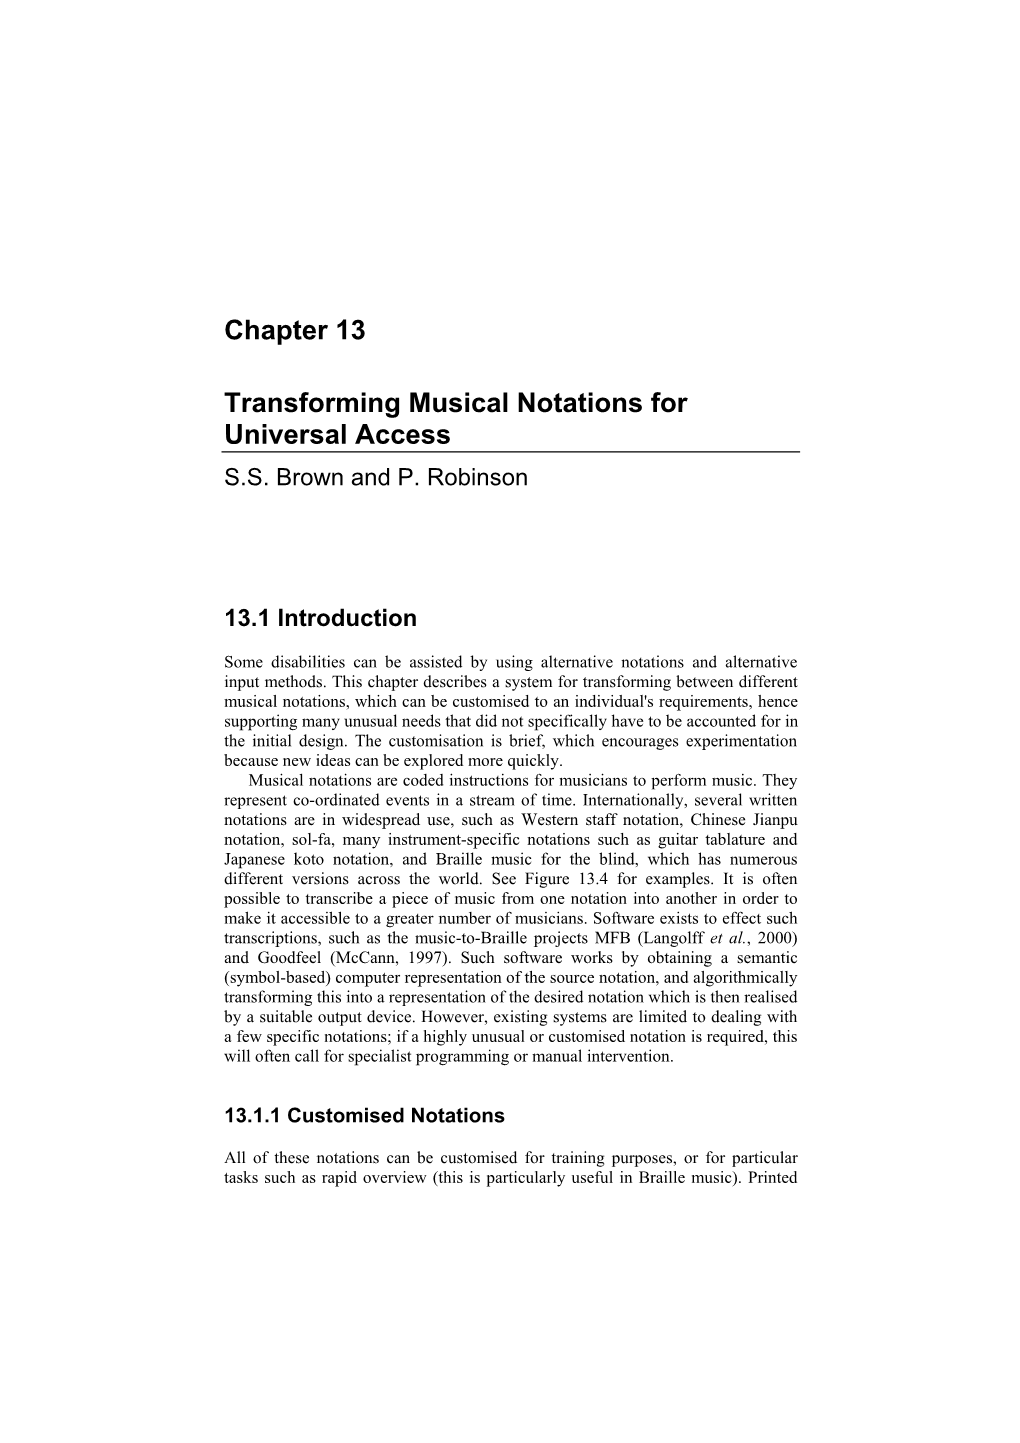 Chapter 13 Transforming Musical Notations for Universal Access